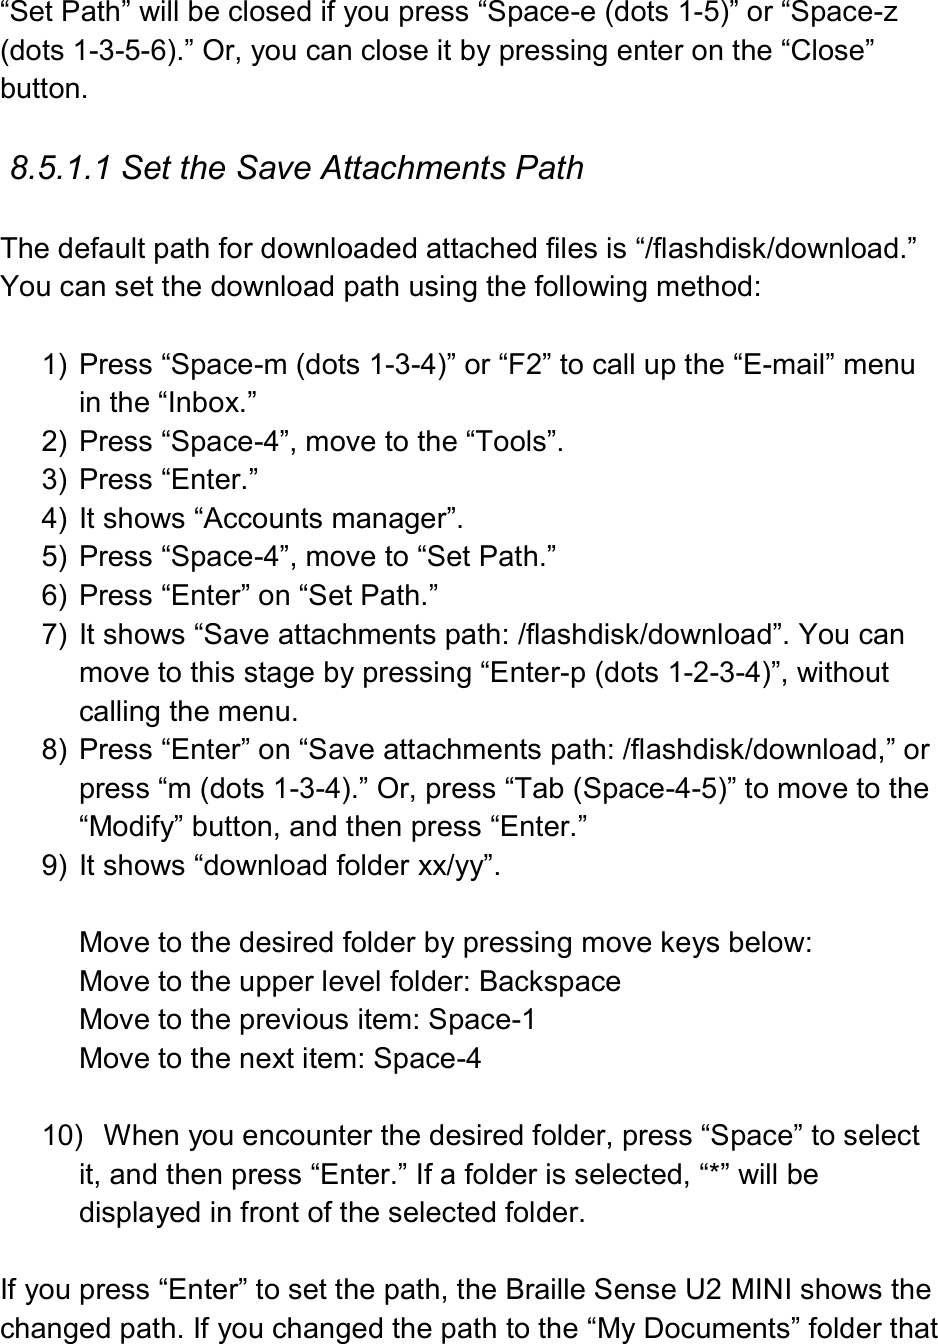  “Set Path” will be closed if you press “Space-e (dots 1-5)” or “Space-z (dots 1-3-5-6).” Or, you can close it by pressing enter on the “Close” button.  8.5.1.1 Set the Save Attachments Path  The default path for downloaded attached files is “/flashdisk/download.”   You can set the download path using the following method:  1)  Press “Space-m (dots 1-3-4)” or “F2” to call up the “E-mail” menu in the “Inbox.” 2)  Press “Space-4”, move to the “Tools”. 3)  Press “Enter.”   4)  It shows “Accounts manager”. 5)  Press “Space-4”, move to “Set Path.” 6)  Press “Enter” on “Set Path.”   7)  It shows “Save attachments path: /flashdisk/download”. You can move to this stage by pressing “Enter-p (dots 1-2-3-4)”, without calling the menu. 8)  Press “Enter” on “Save attachments path: /flashdisk/download,” or press “m (dots 1-3-4).” Or, press “Tab (Space-4-5)” to move to the “Modify” button, and then press “Enter.” 9)  It shows “download folder xx/yy”.  Move to the desired folder by pressing move keys below: Move to the upper level folder: Backspace Move to the previous item: Space-1 Move to the next item: Space-4  10)  When you encounter the desired folder, press “Space” to select it, and then press “Enter.” If a folder is selected, “*” will be displayed in front of the selected folder.  If you press “Enter” to set the path, the Braille Sense U2 MINI shows the changed path. If you changed the path to the “My Documents” folder that 